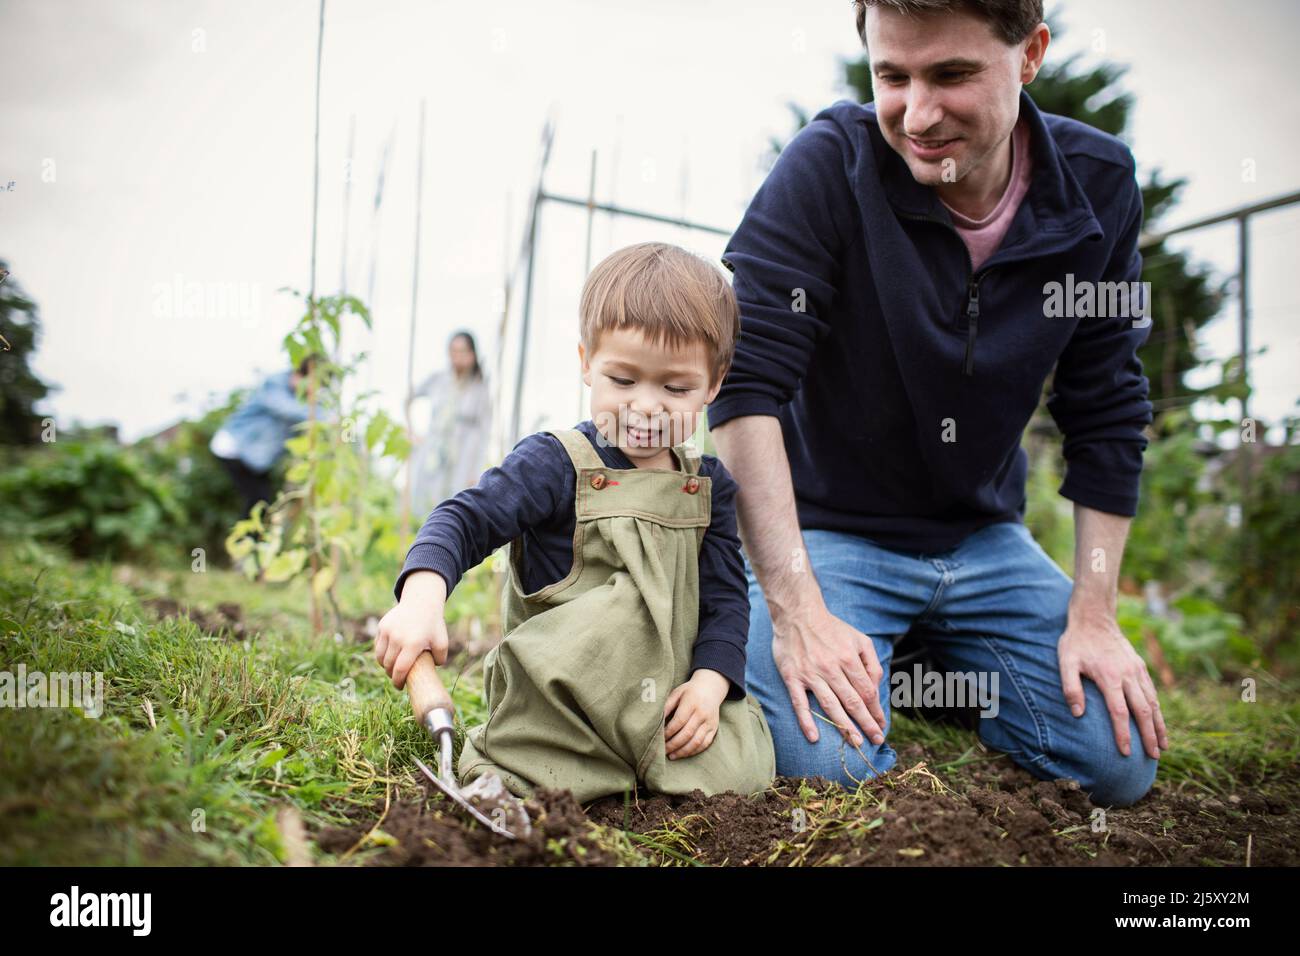 Father and son digging in garden dirt with trowel Stock Photo